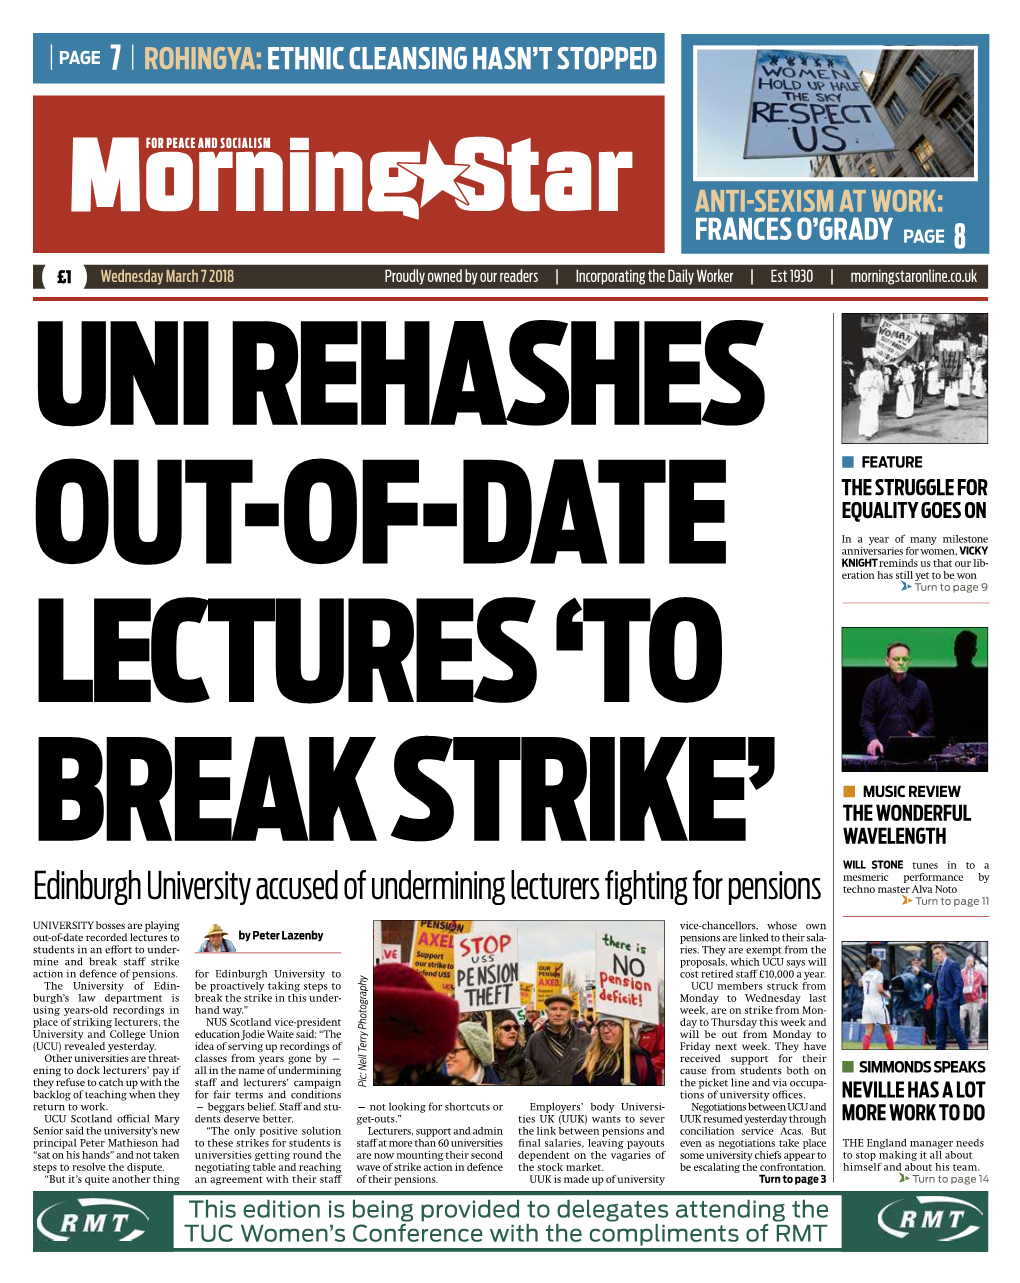 Edinburgh University Accused of Undermining Lecturers Fighting For